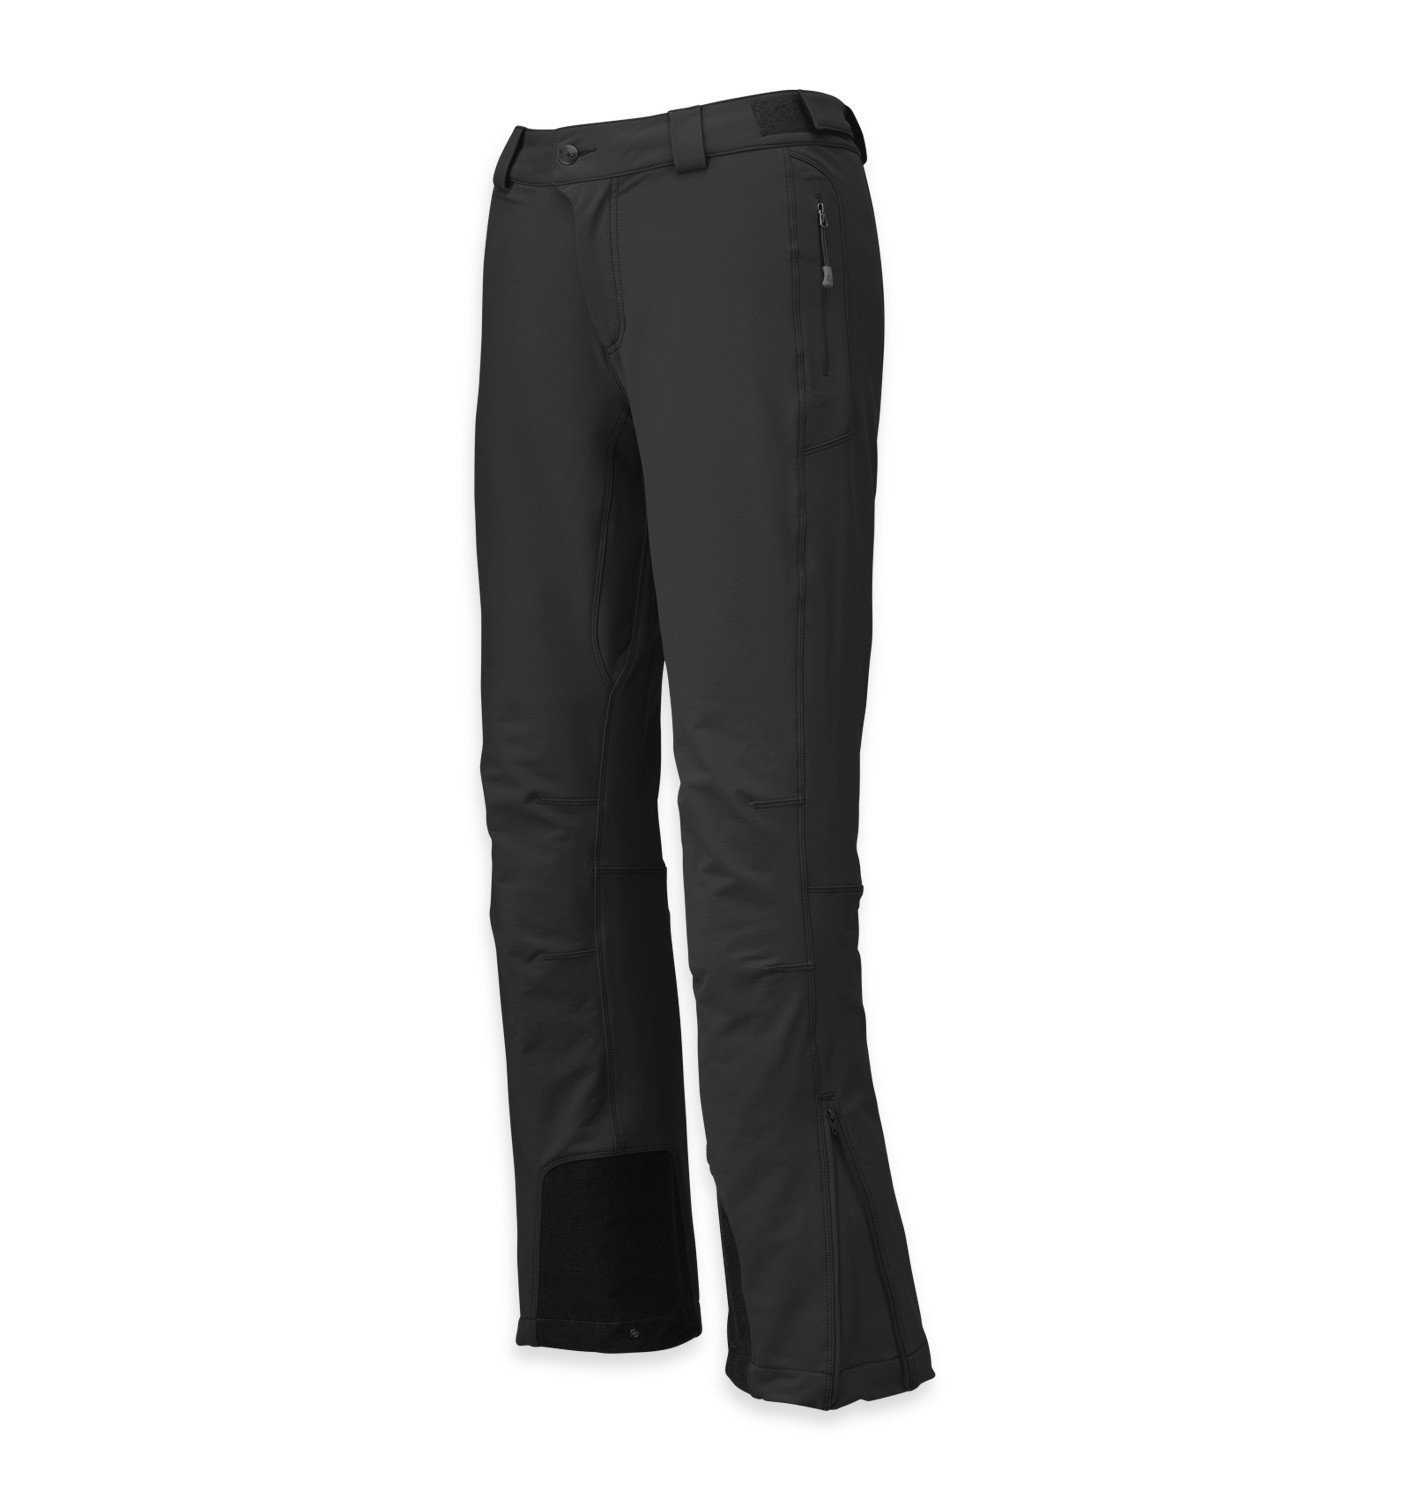 Outdoor Research Women's Cirque Pant